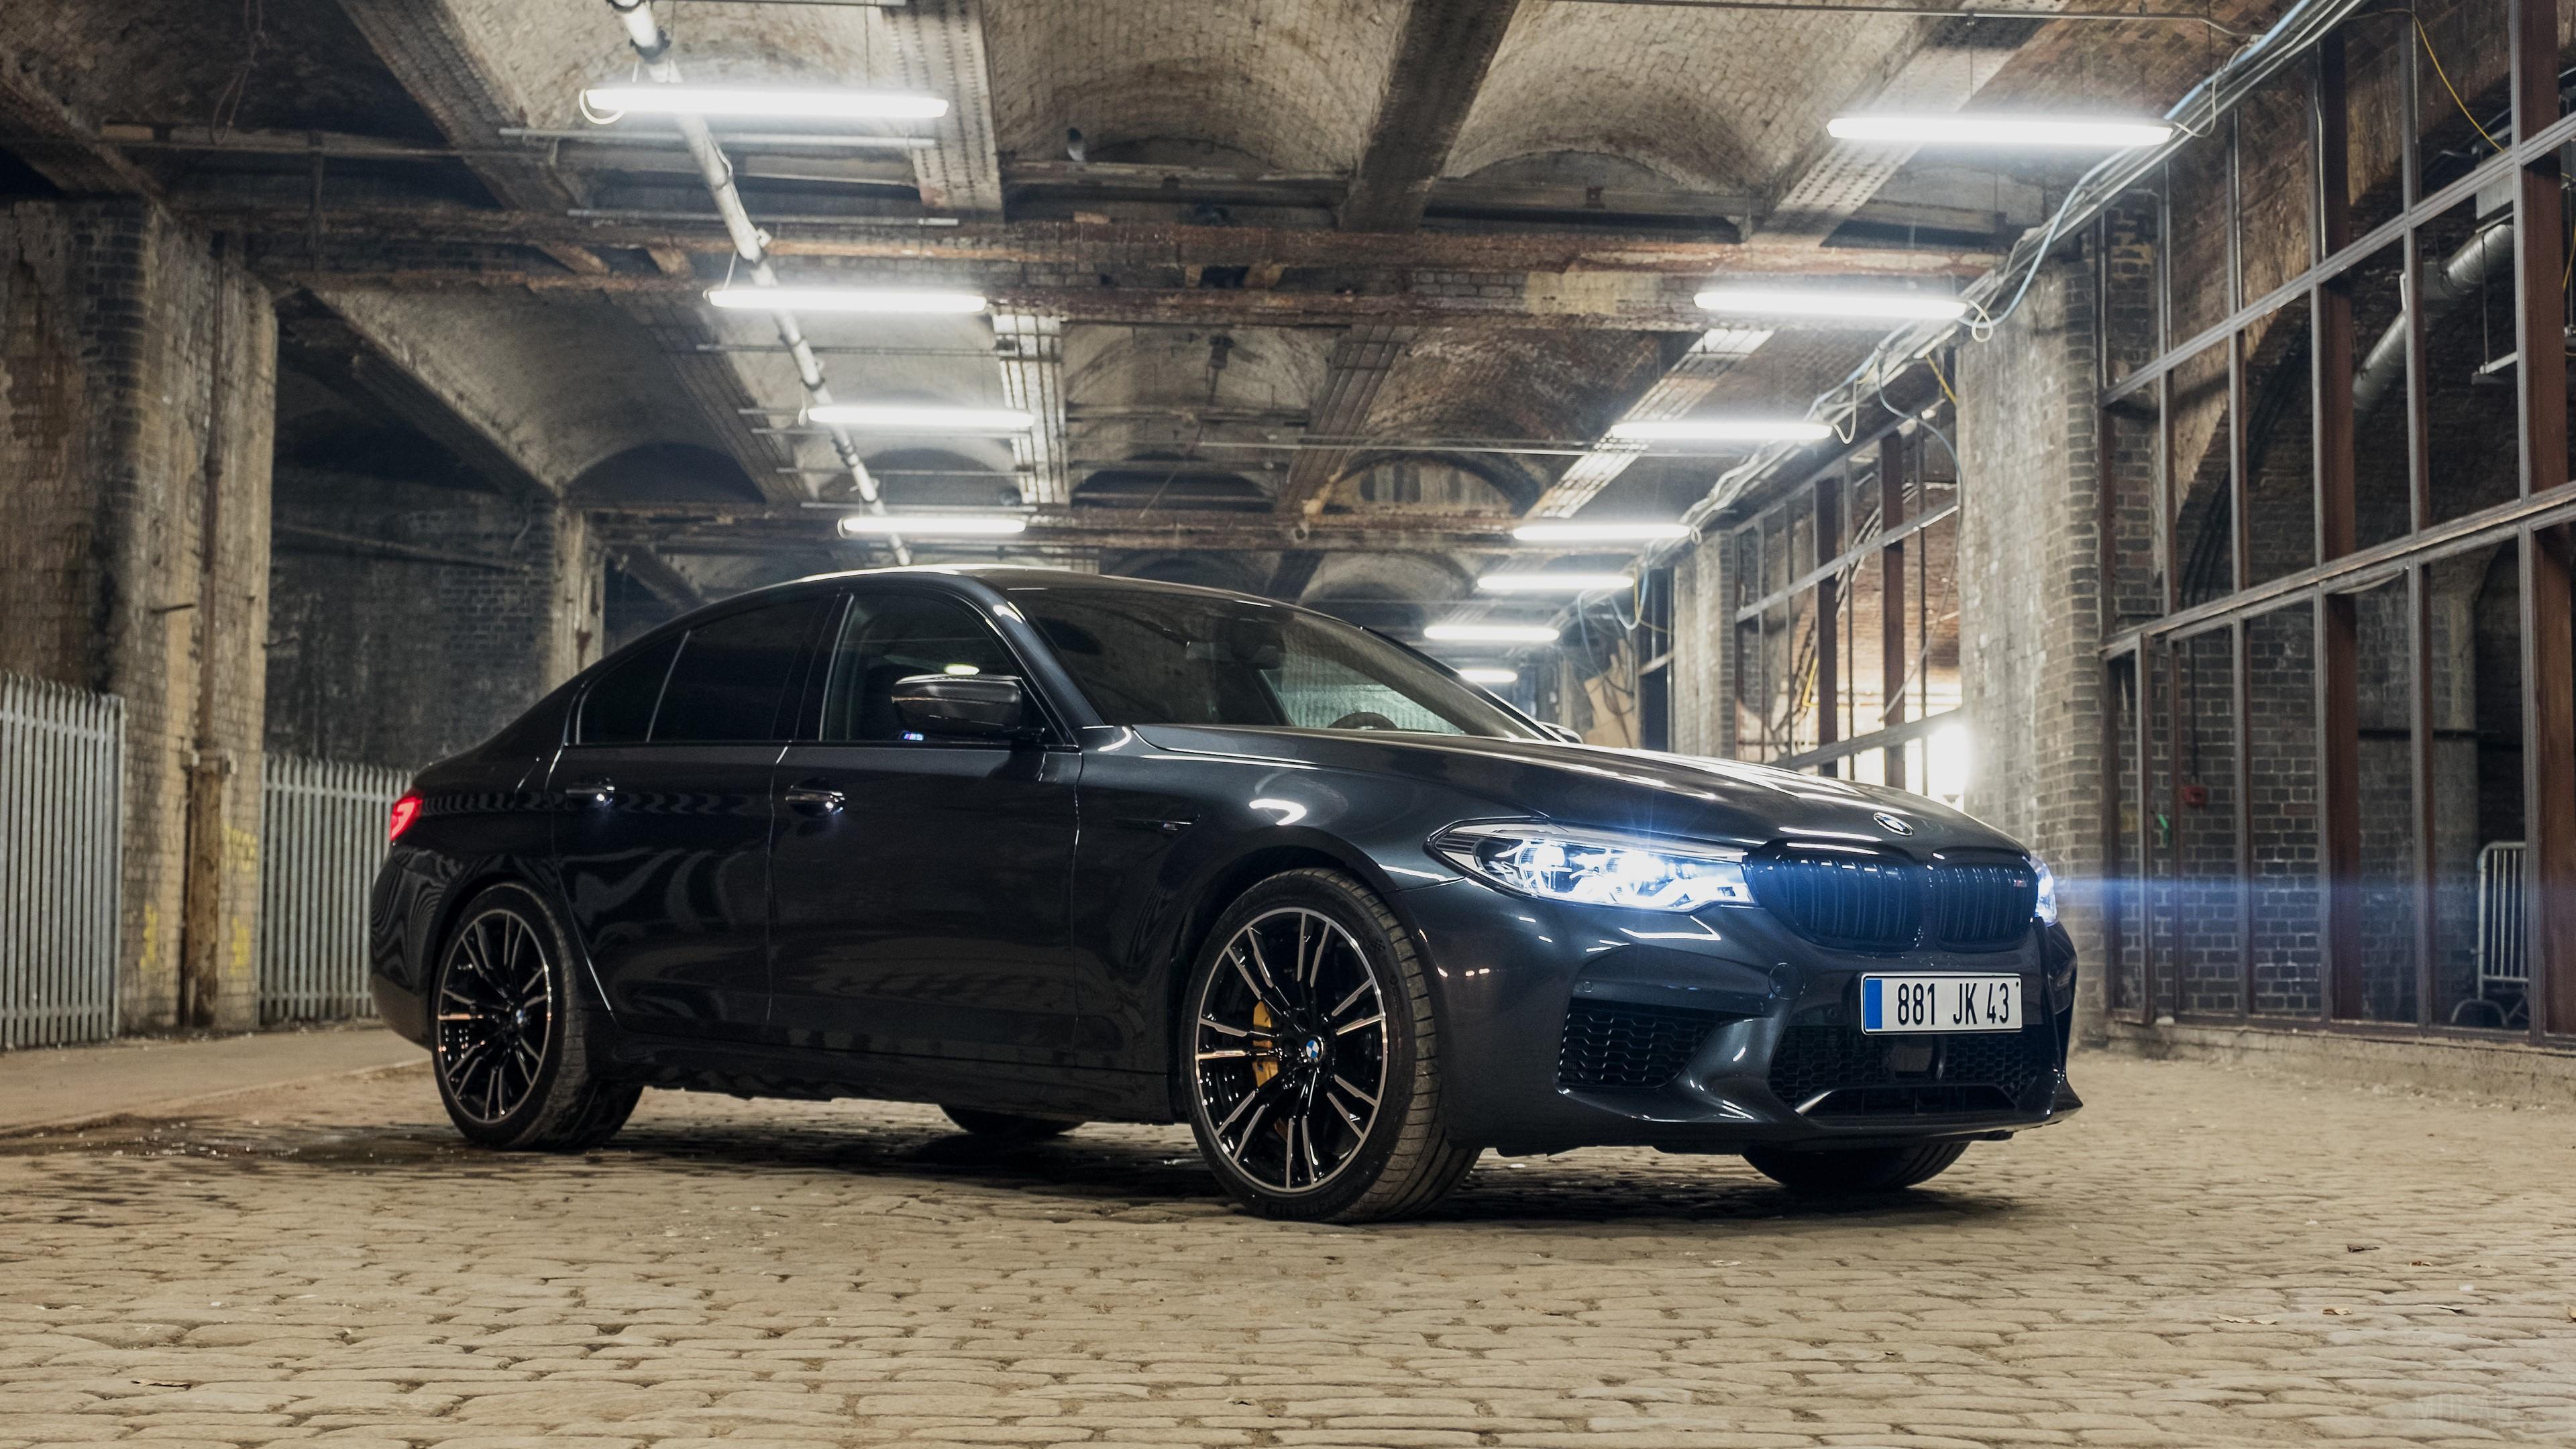 HD wallpaper, Mission Impossible Fallout Bmw M5 4K